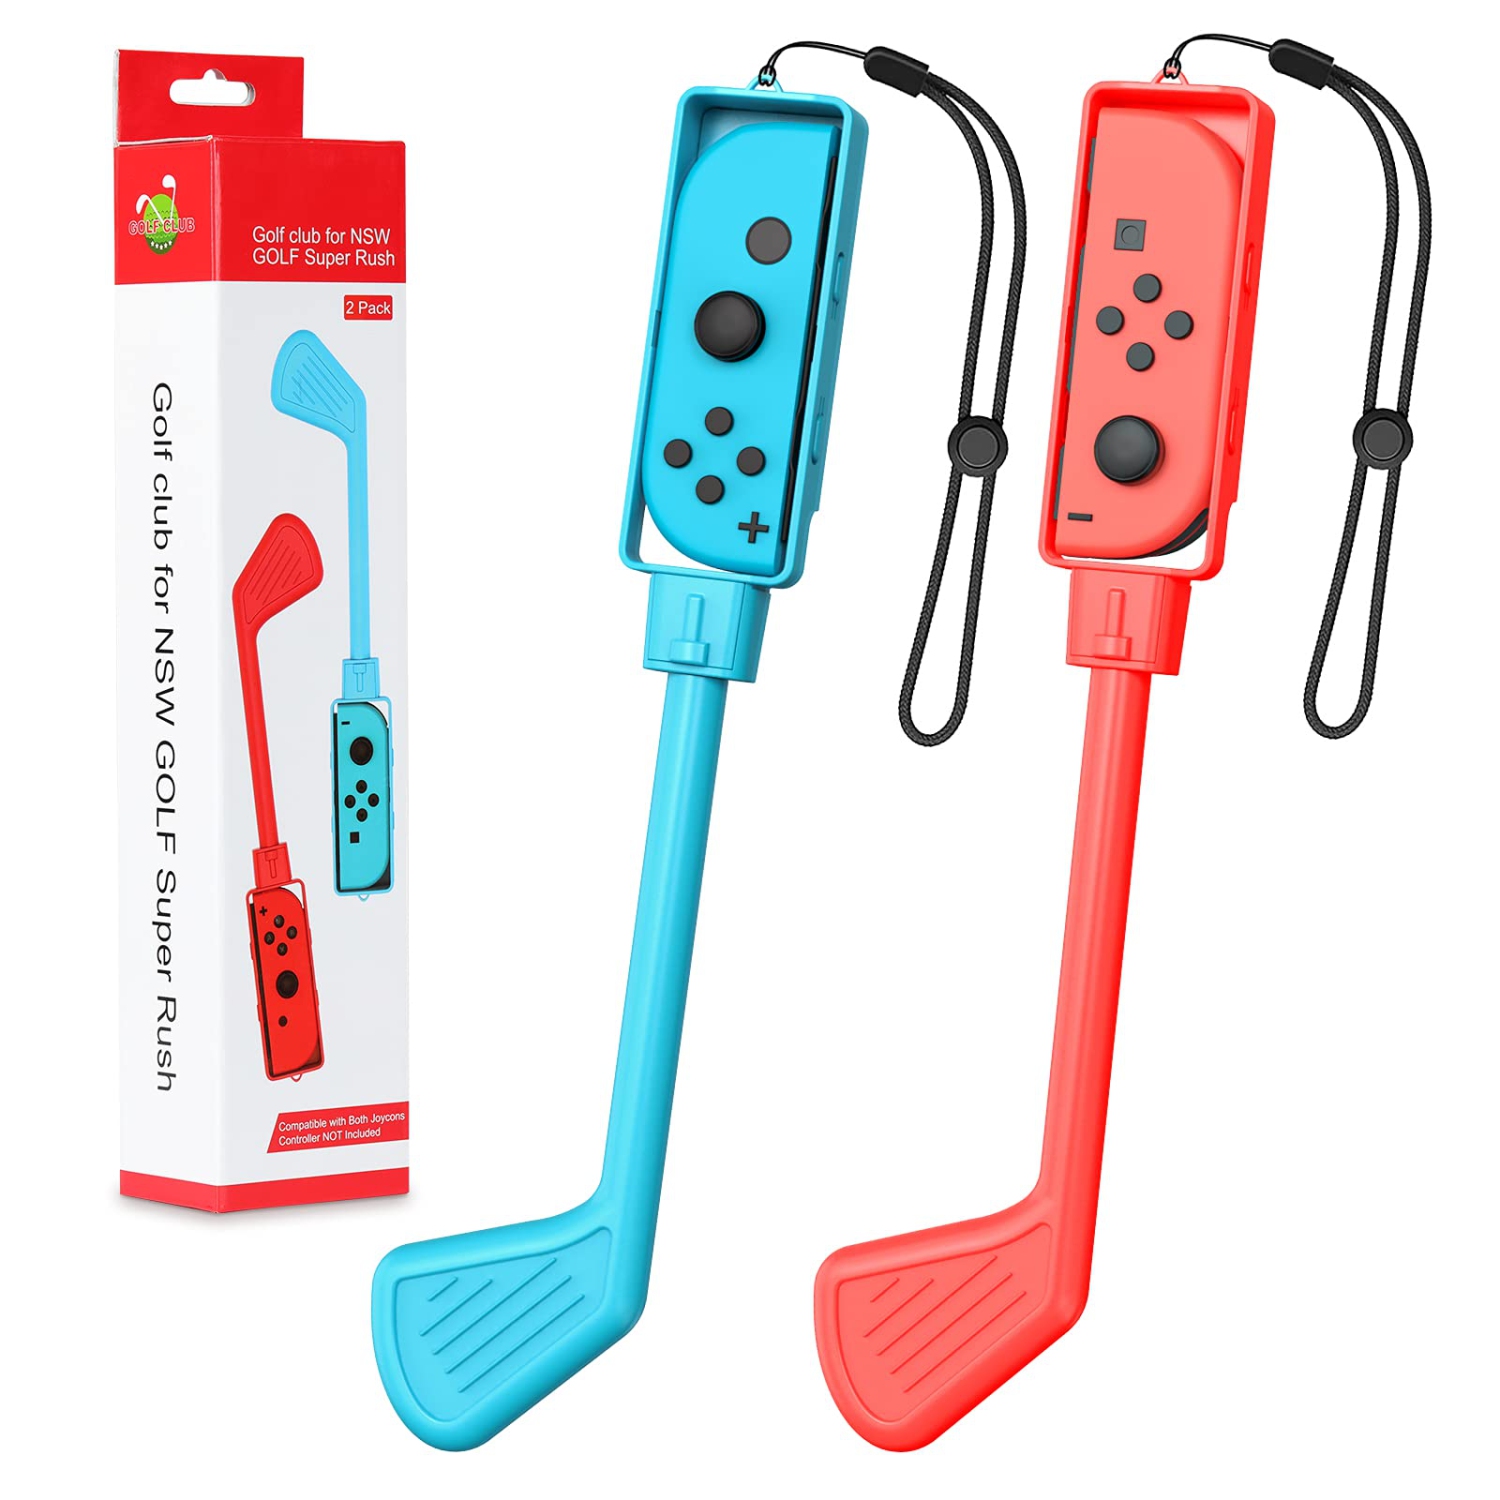 Golf Clubs Fit with Nintendo Switch Mario Golf: Super Rush Golf/Switch Sports, 2 Pack Hand Grips Game Accessories Fit Switch/Switch OLED Joy-Con Controller with Hand Strap